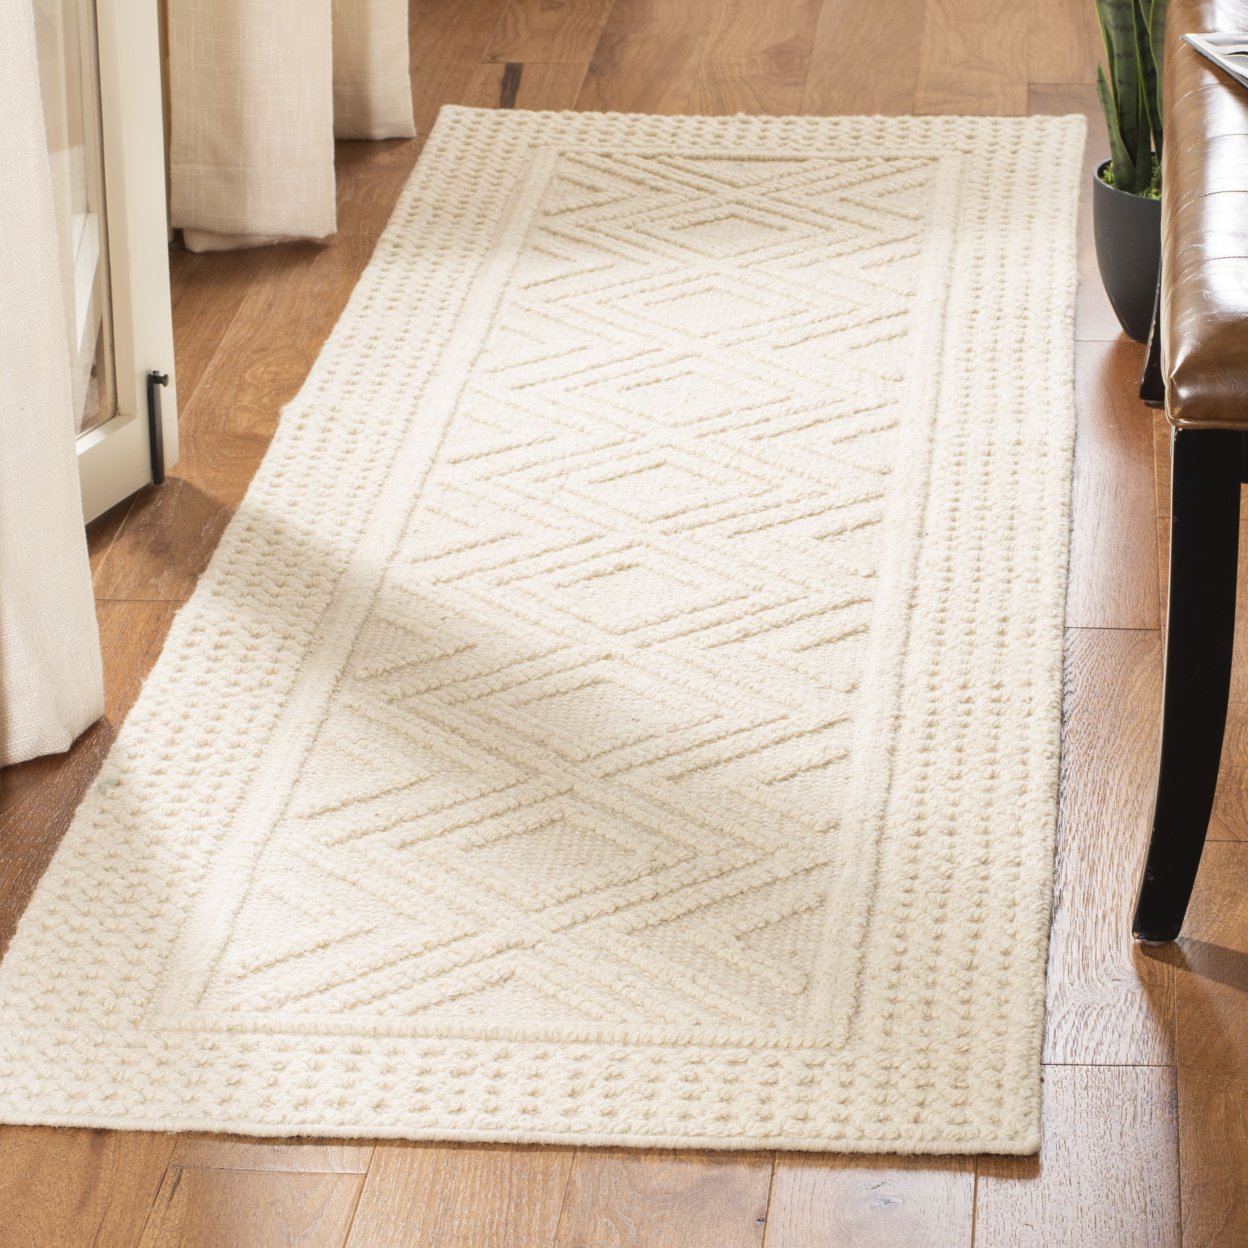 SAFAVIEH Vermont Collection VRM212A Handwoven Ivory Rug - 9 X 12